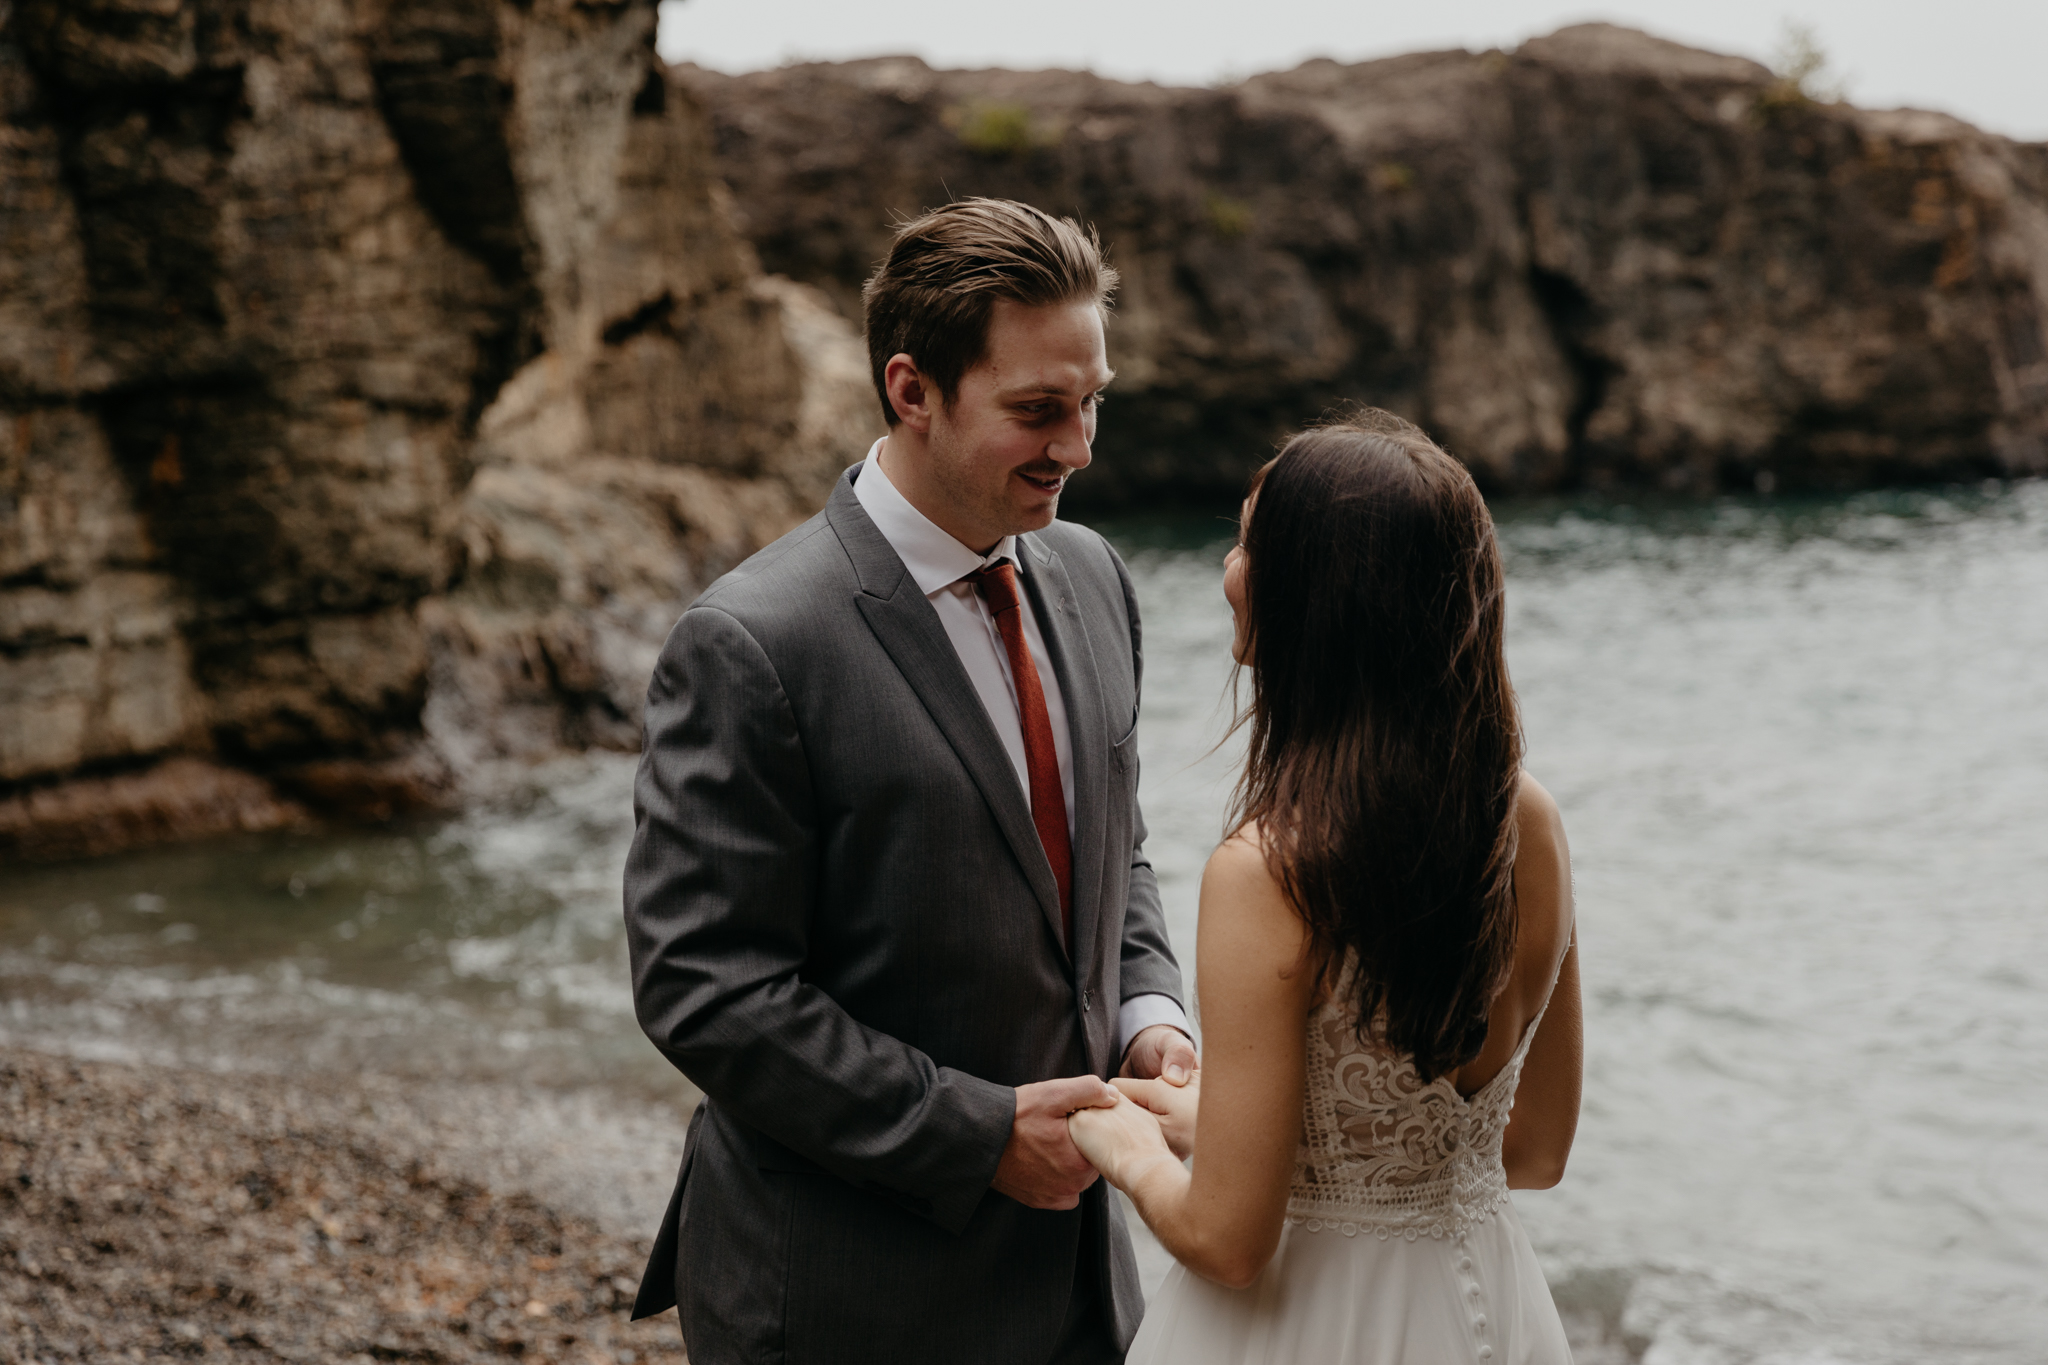 The dreamiest moody elopement ceremony at Presque Isle Park, Michigan